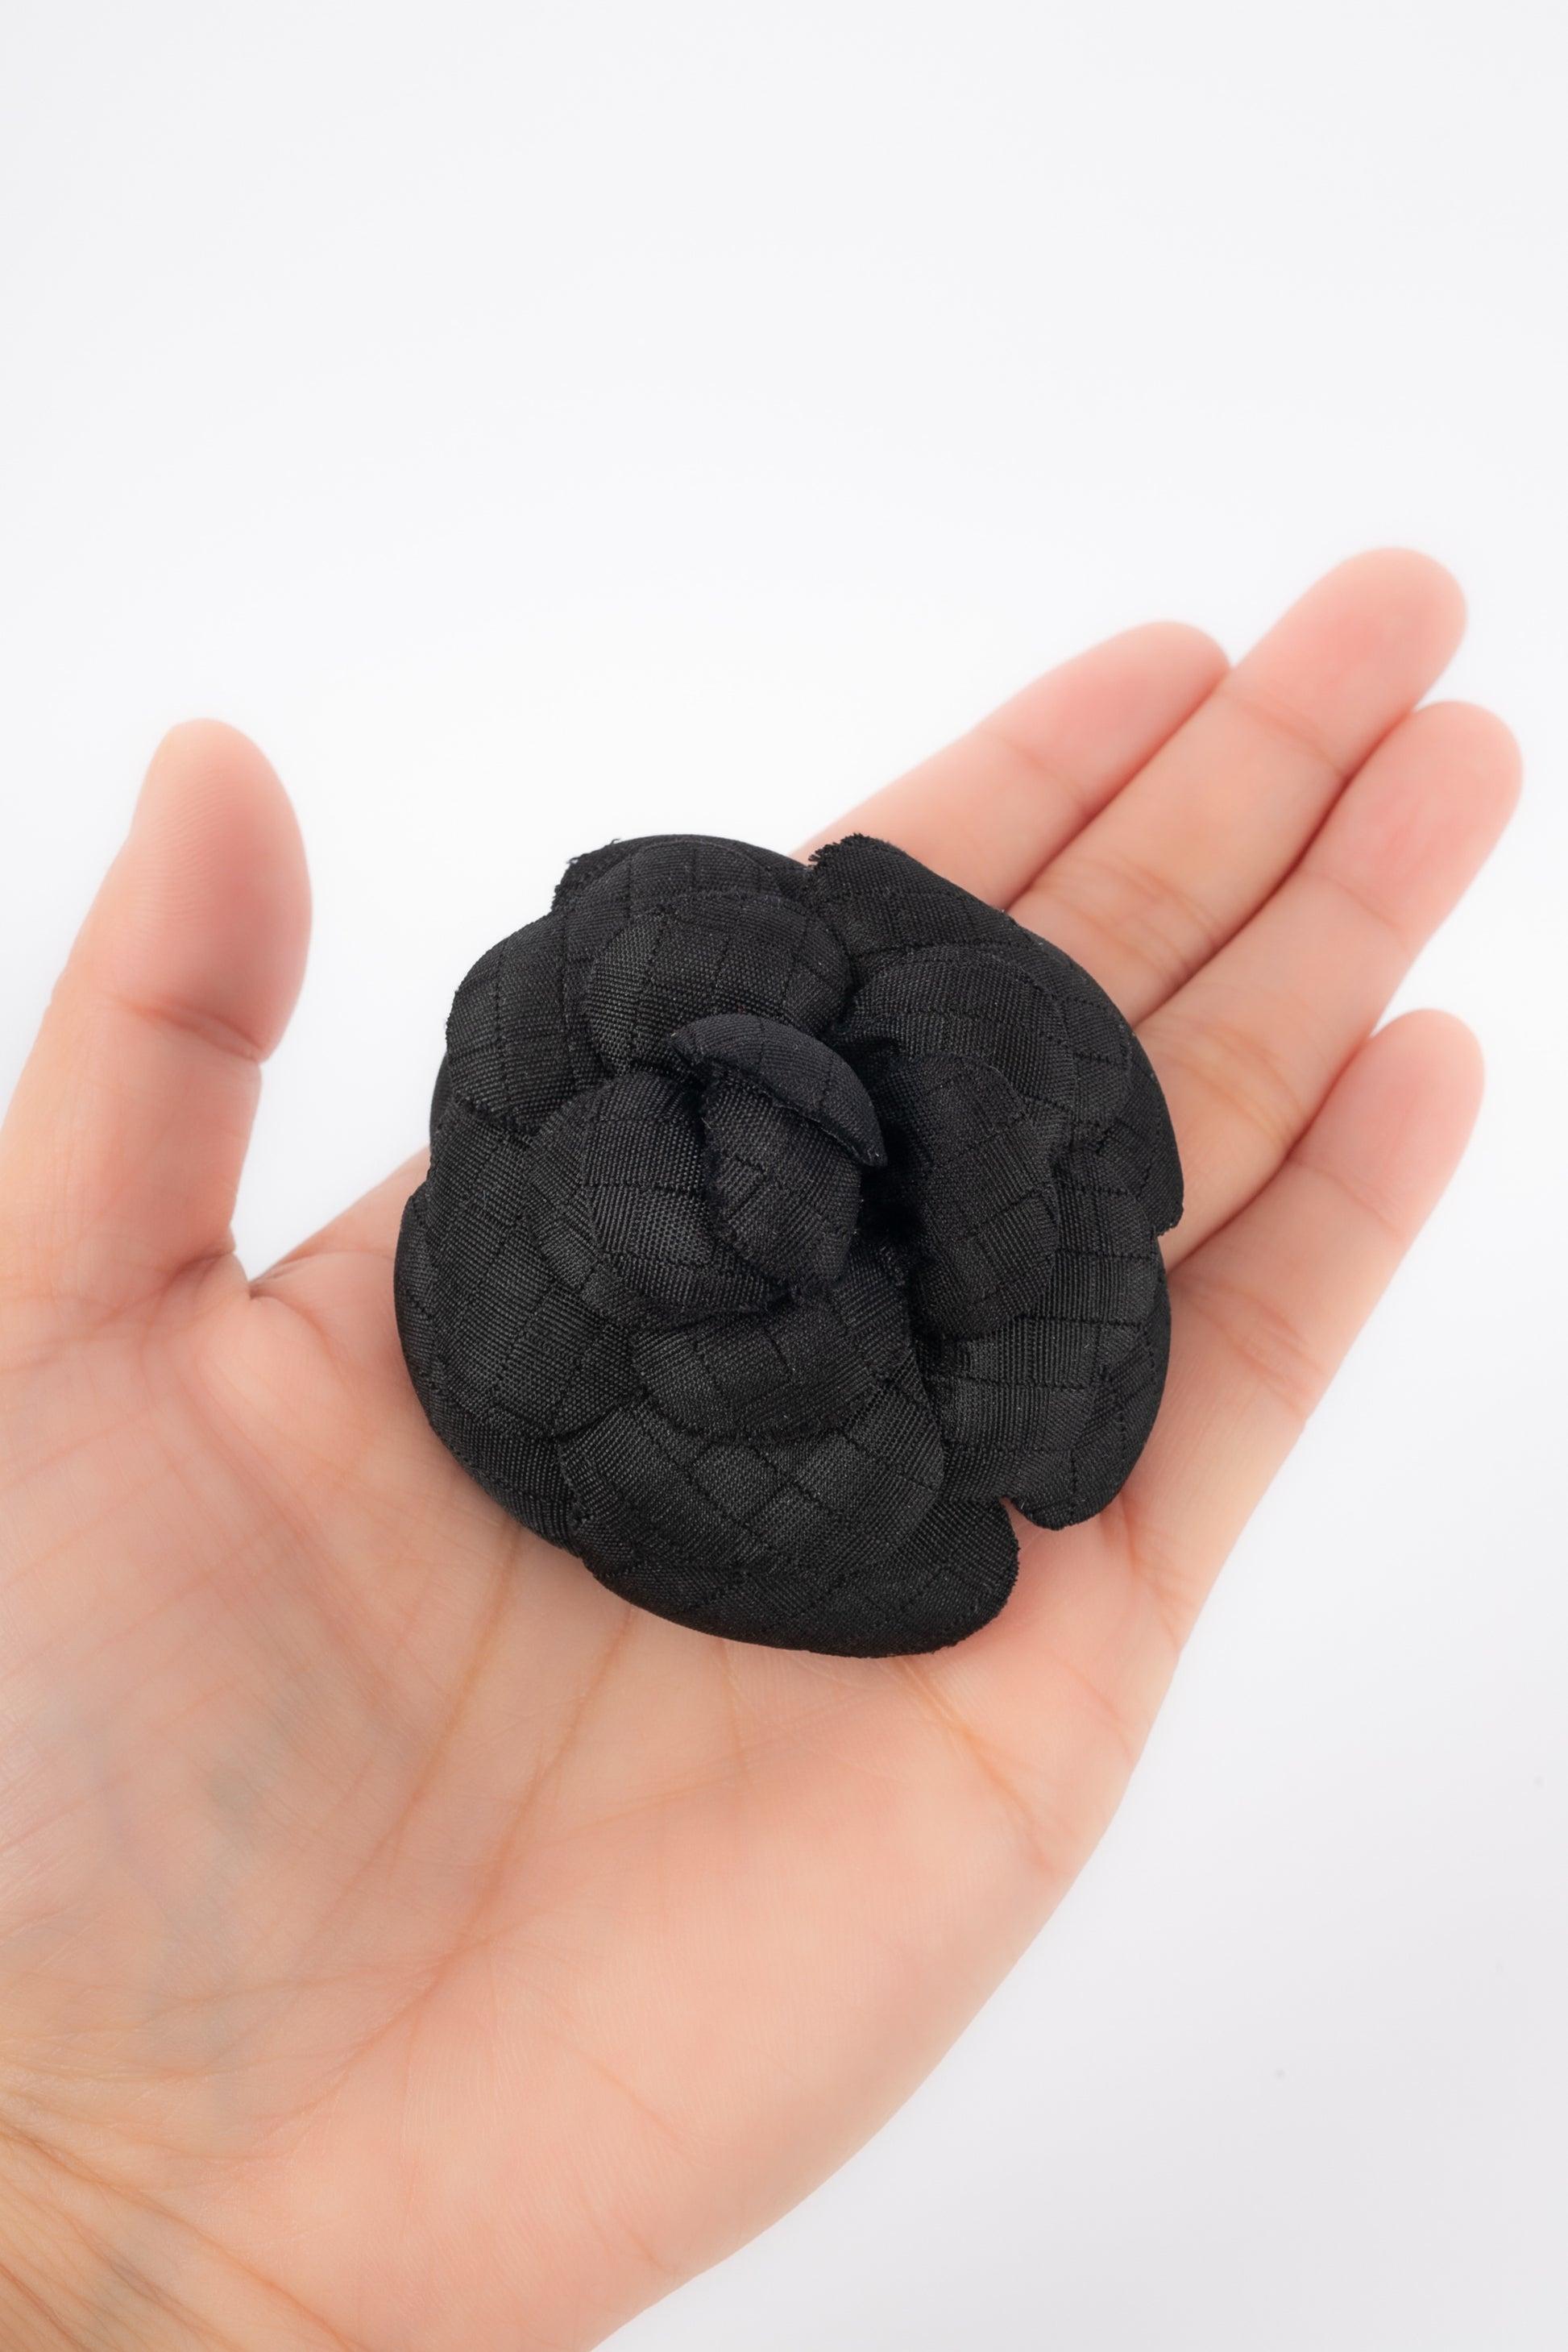 Chanel - (Made in France) Black woven fabric camellia brooch. Signed plate on the back.

Additional information: 
Condition: Very good condition
Dimensions: Diameter: 5.5 cm
 
Seller Reference: BRB16